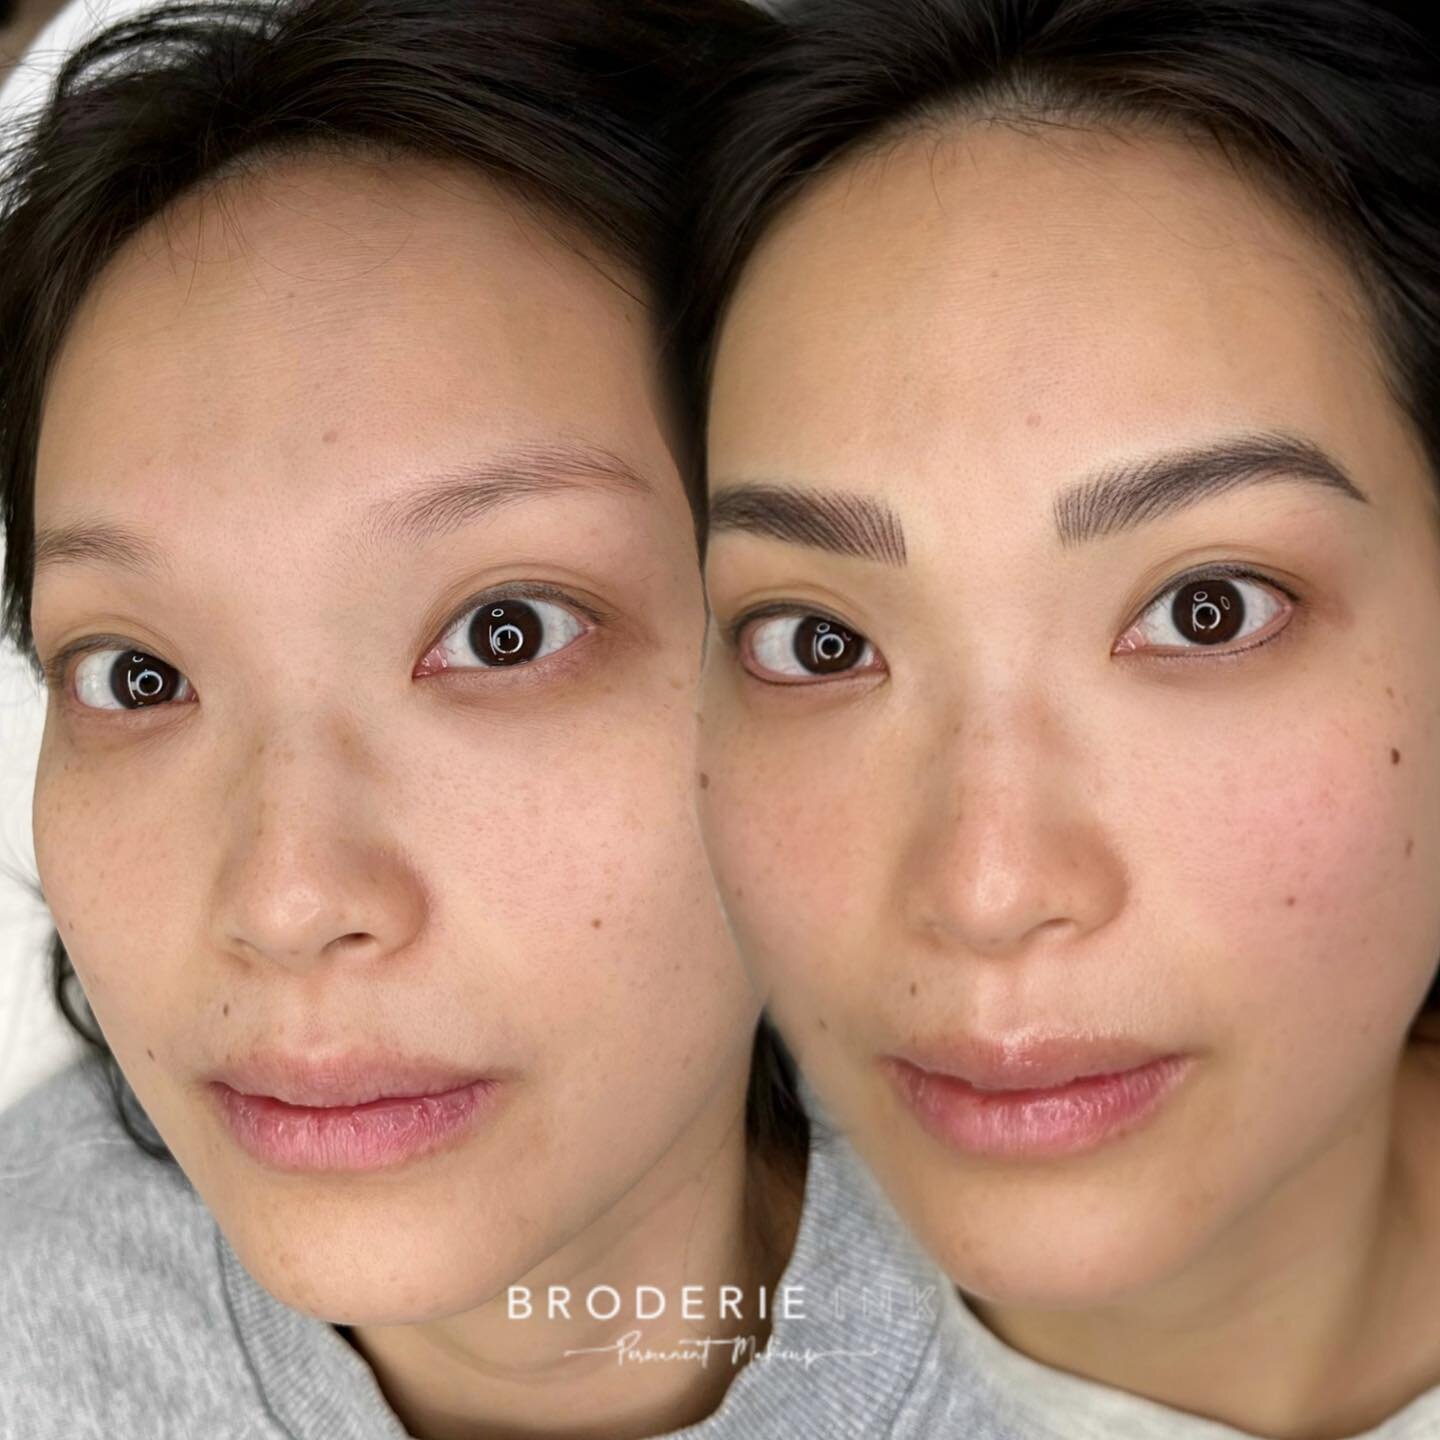 Gave my client a makeover with the combination nanostrokes + lash line procedure ✨ You can see a huge change with this side by side comparison on how adding contrast back to your face can make you less pale or washed out. Just choosing the right lip 